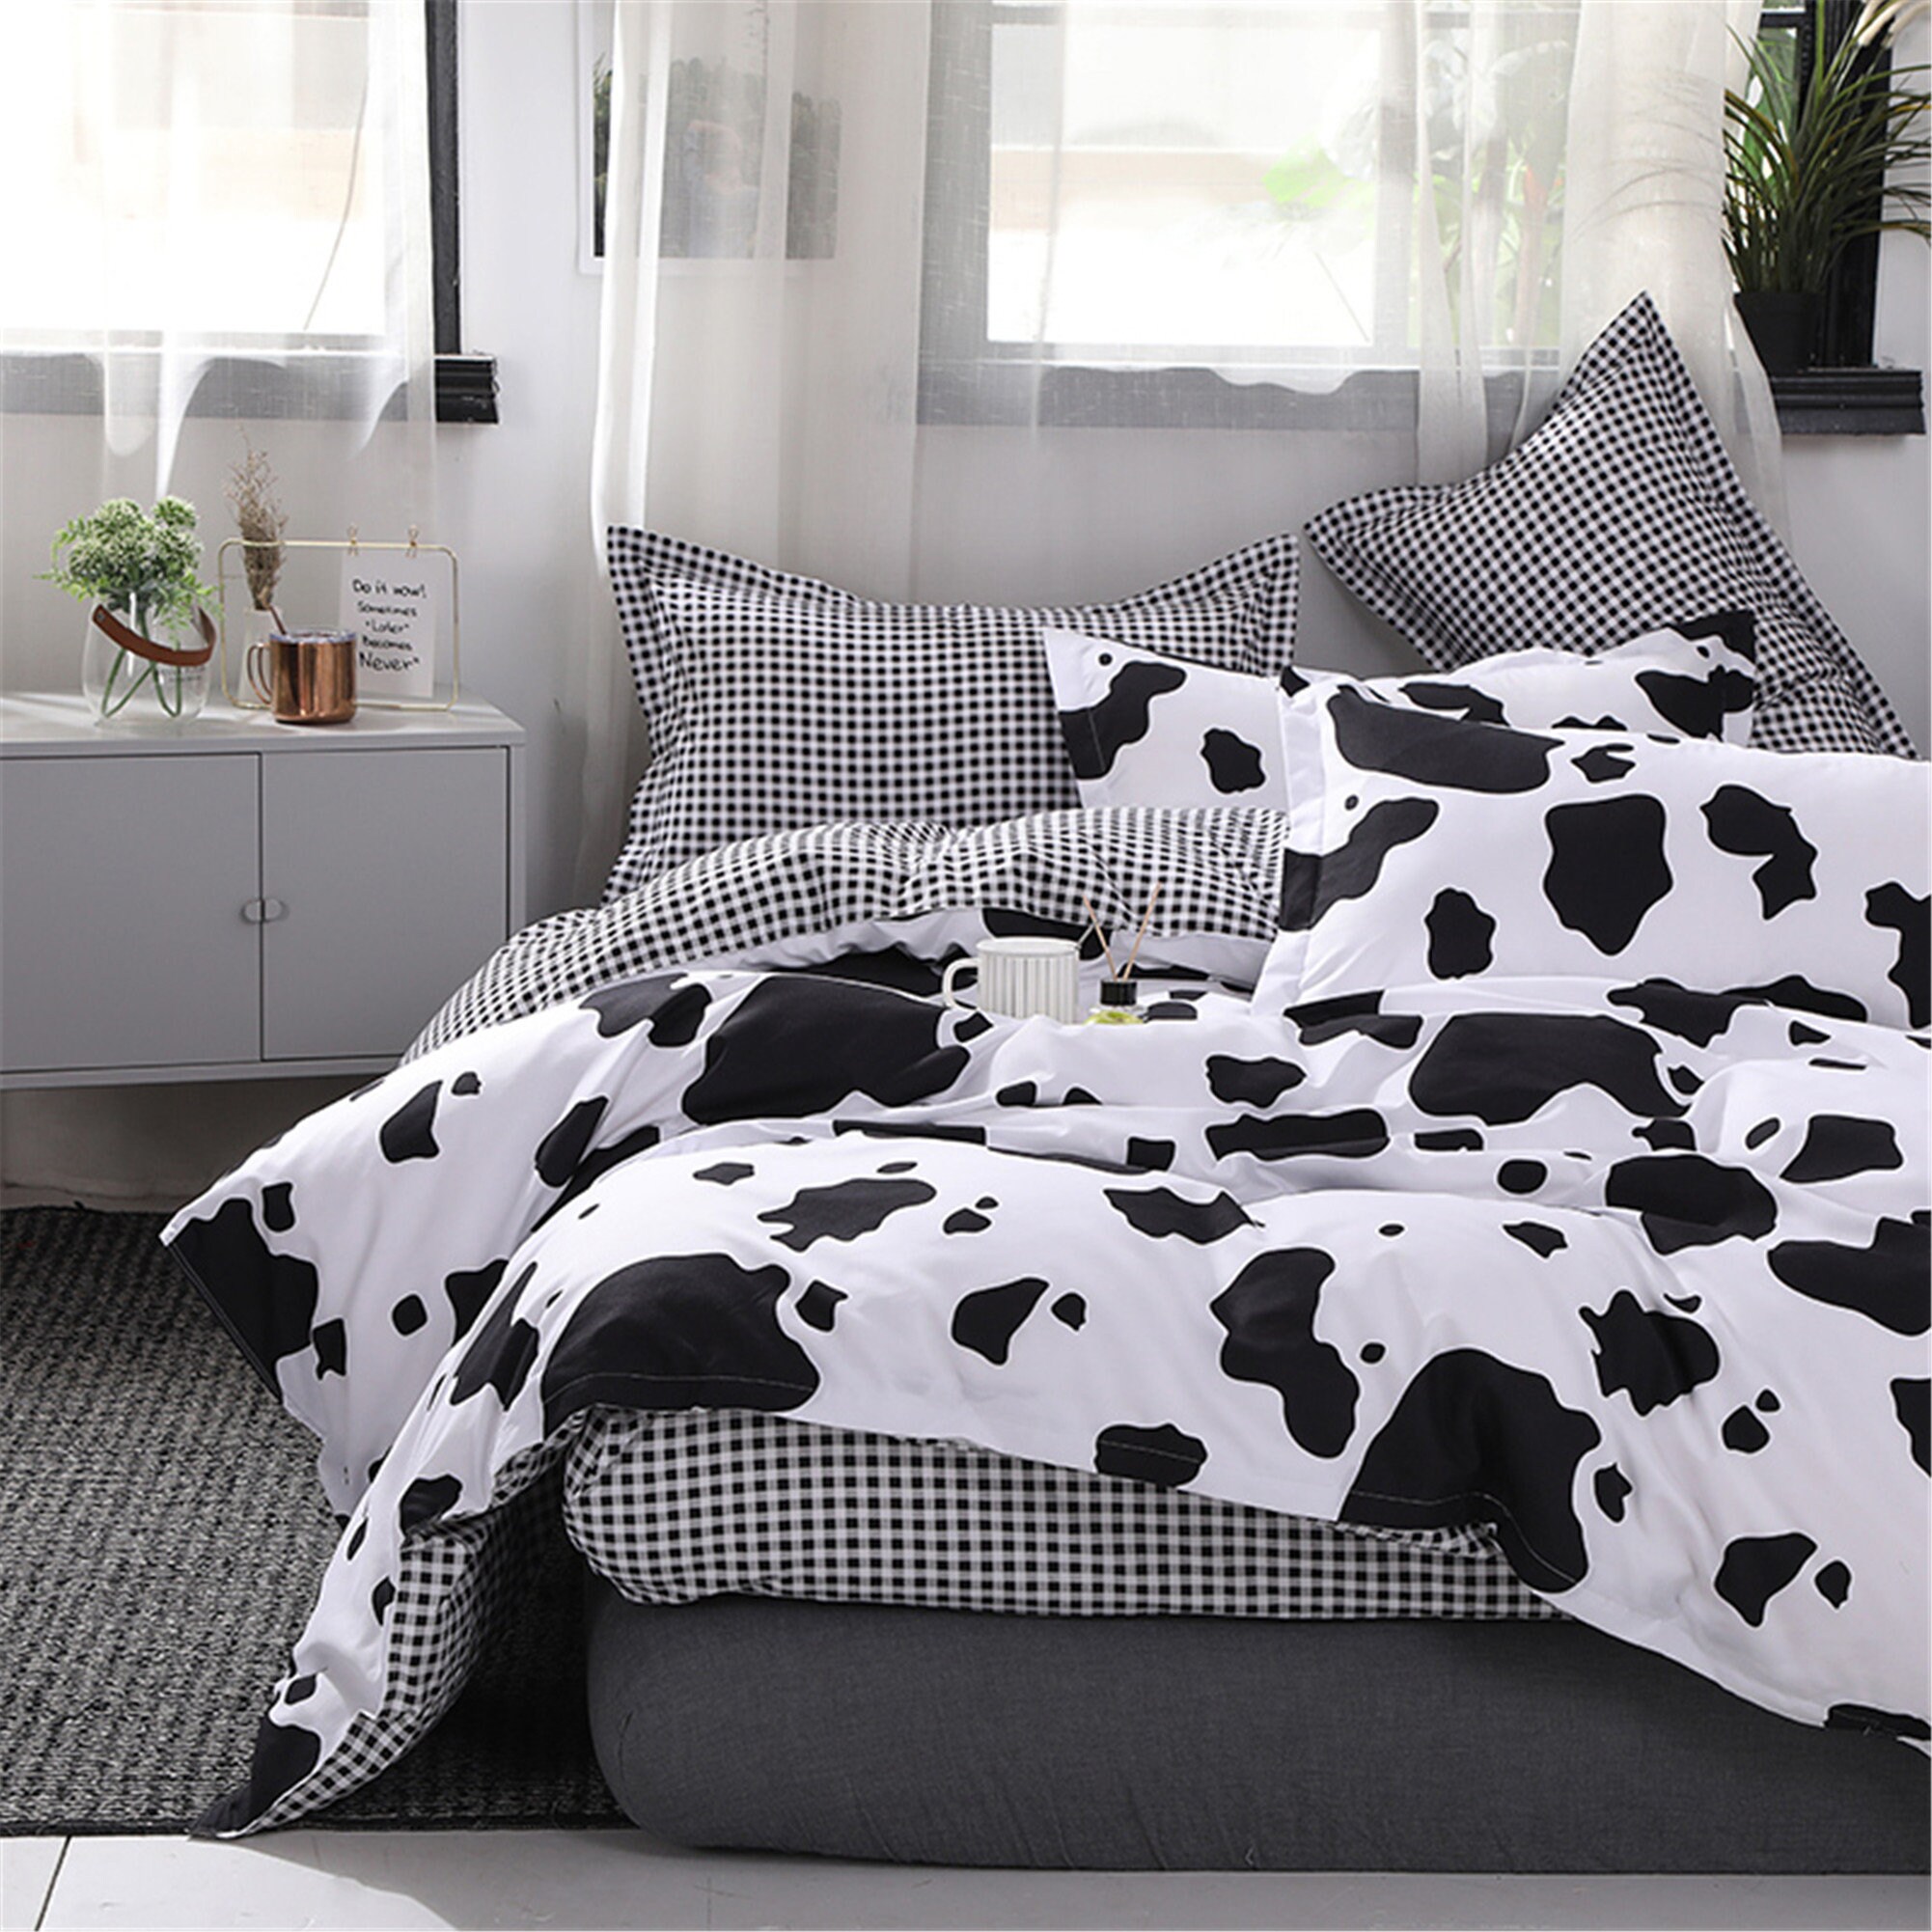 Cute Pattern Cow Cattle Farming Quilts Blanket Twin Queen King Super King Size Best Decorative for Bedroom Living Room Home Decor 